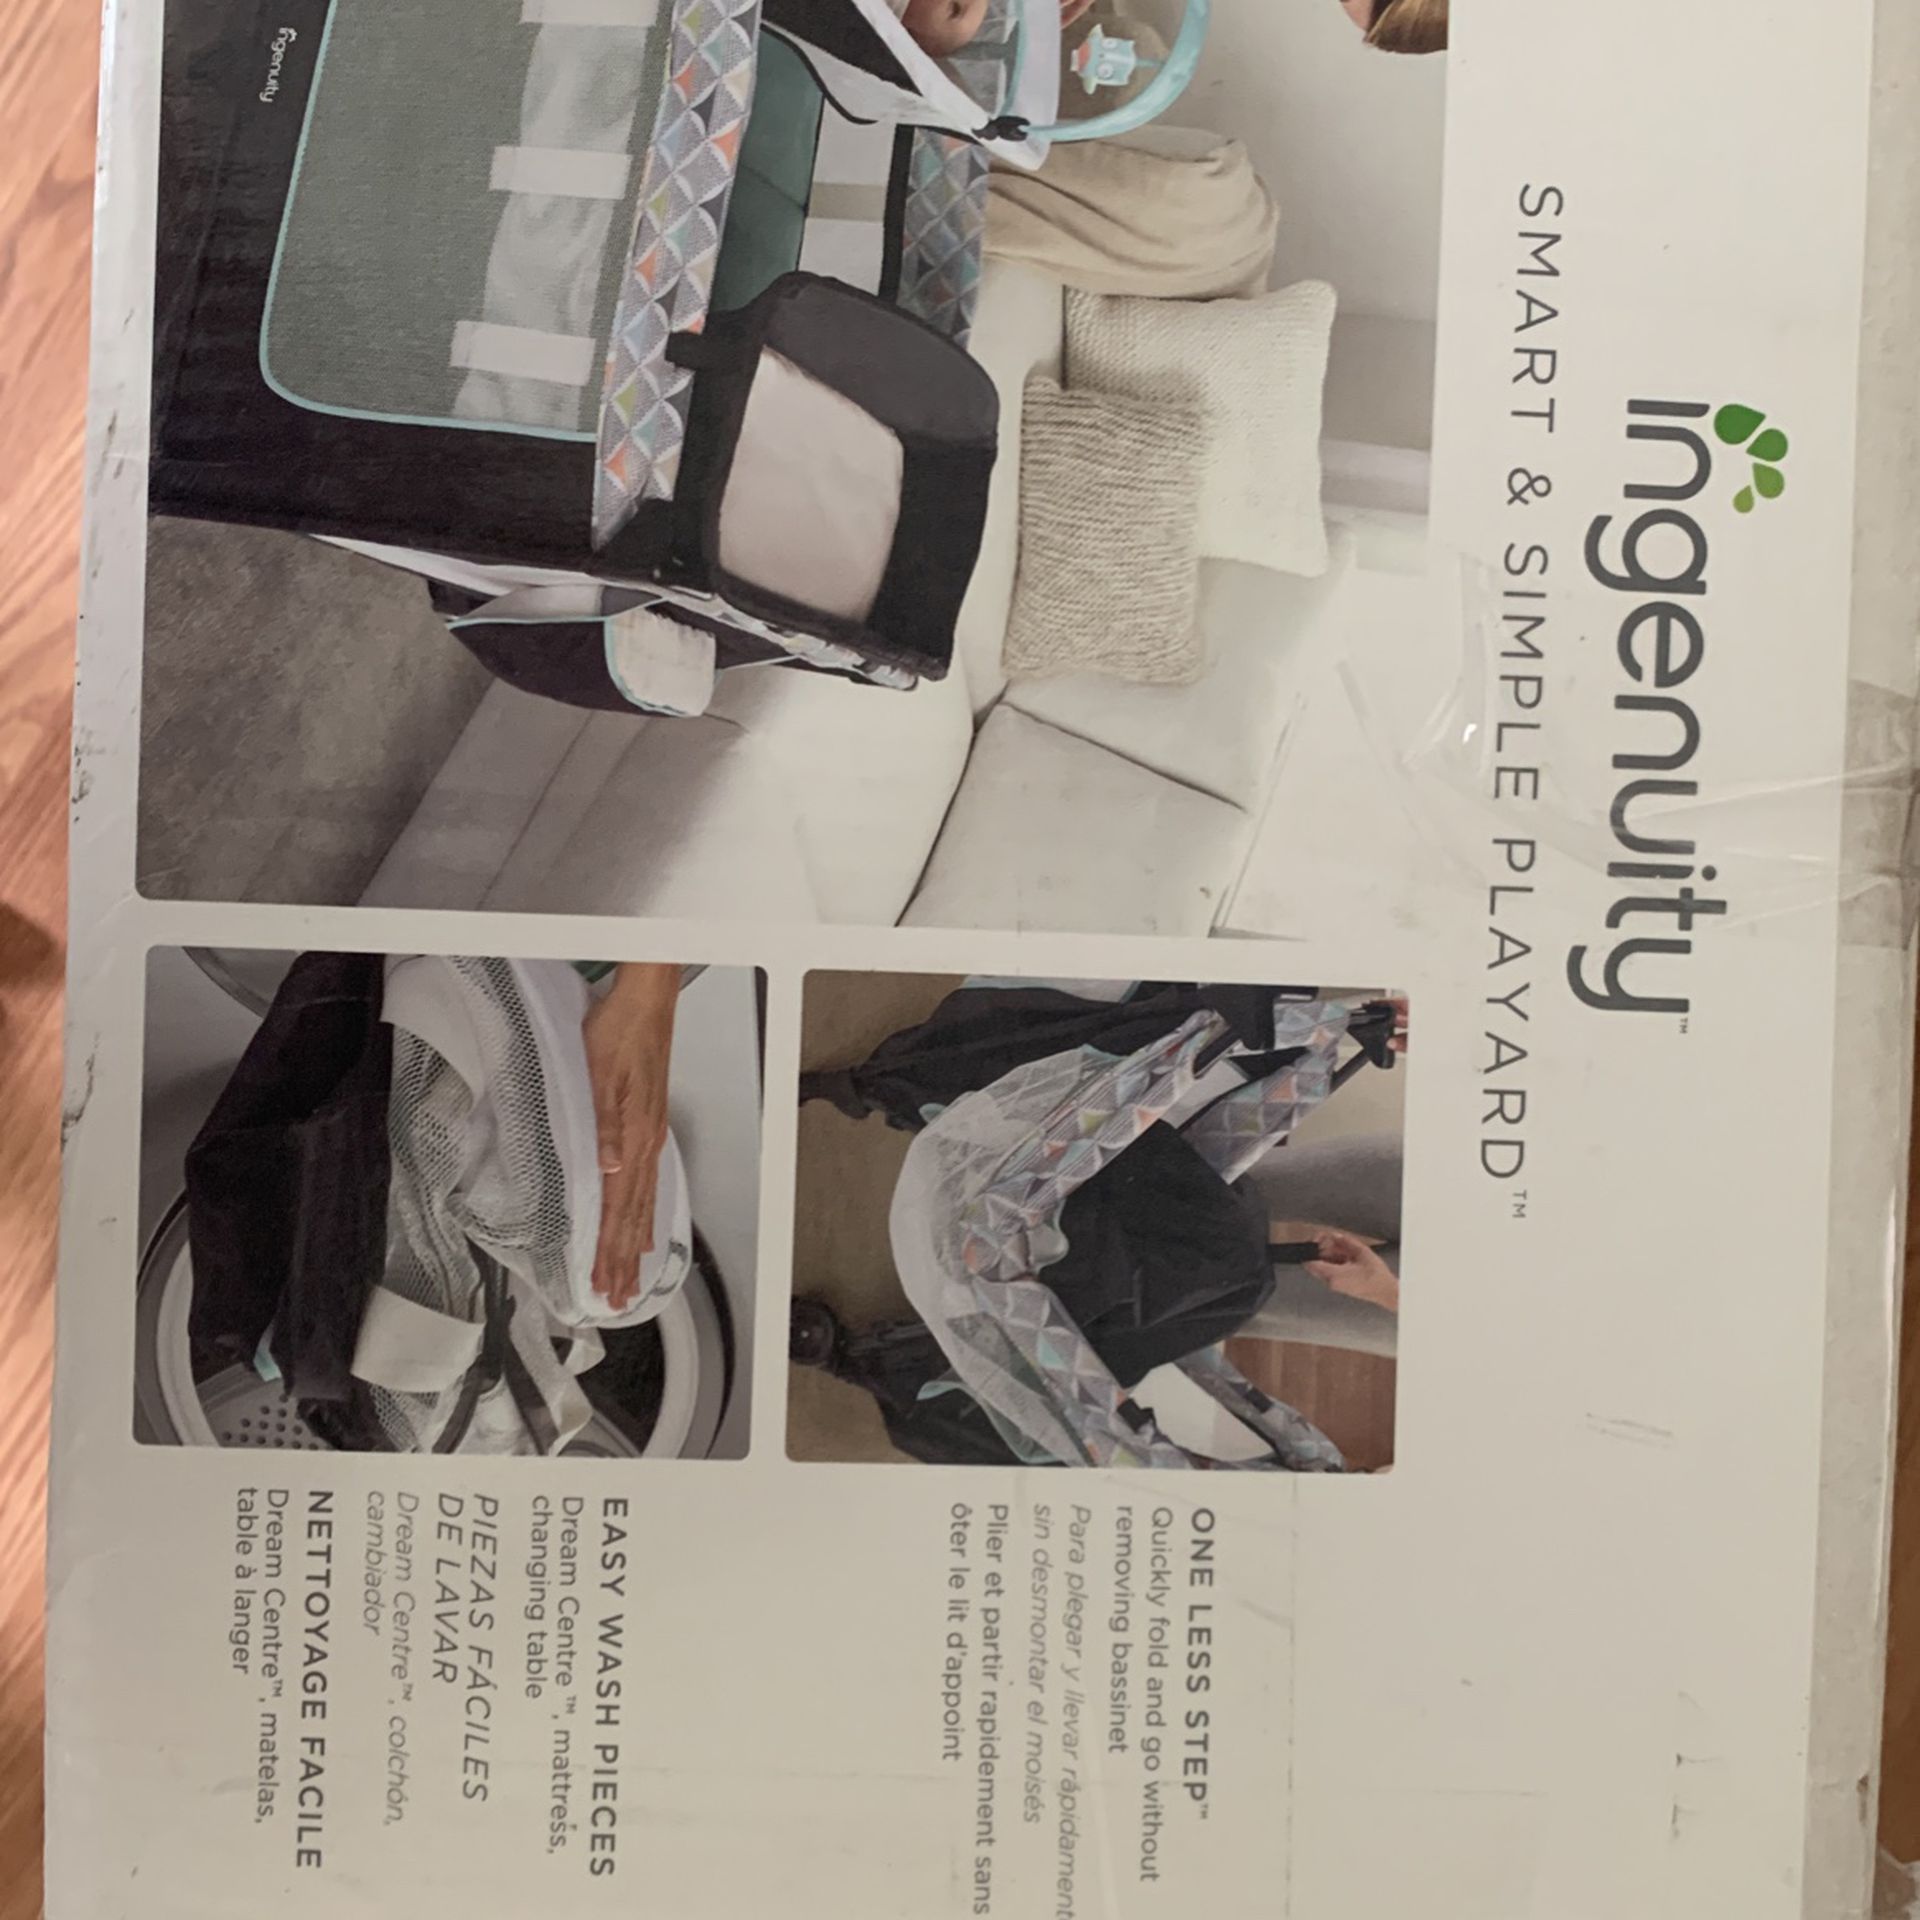 Ingenuity Smart and Simple Packable Portable Playard with Changing Table - Ridgedale